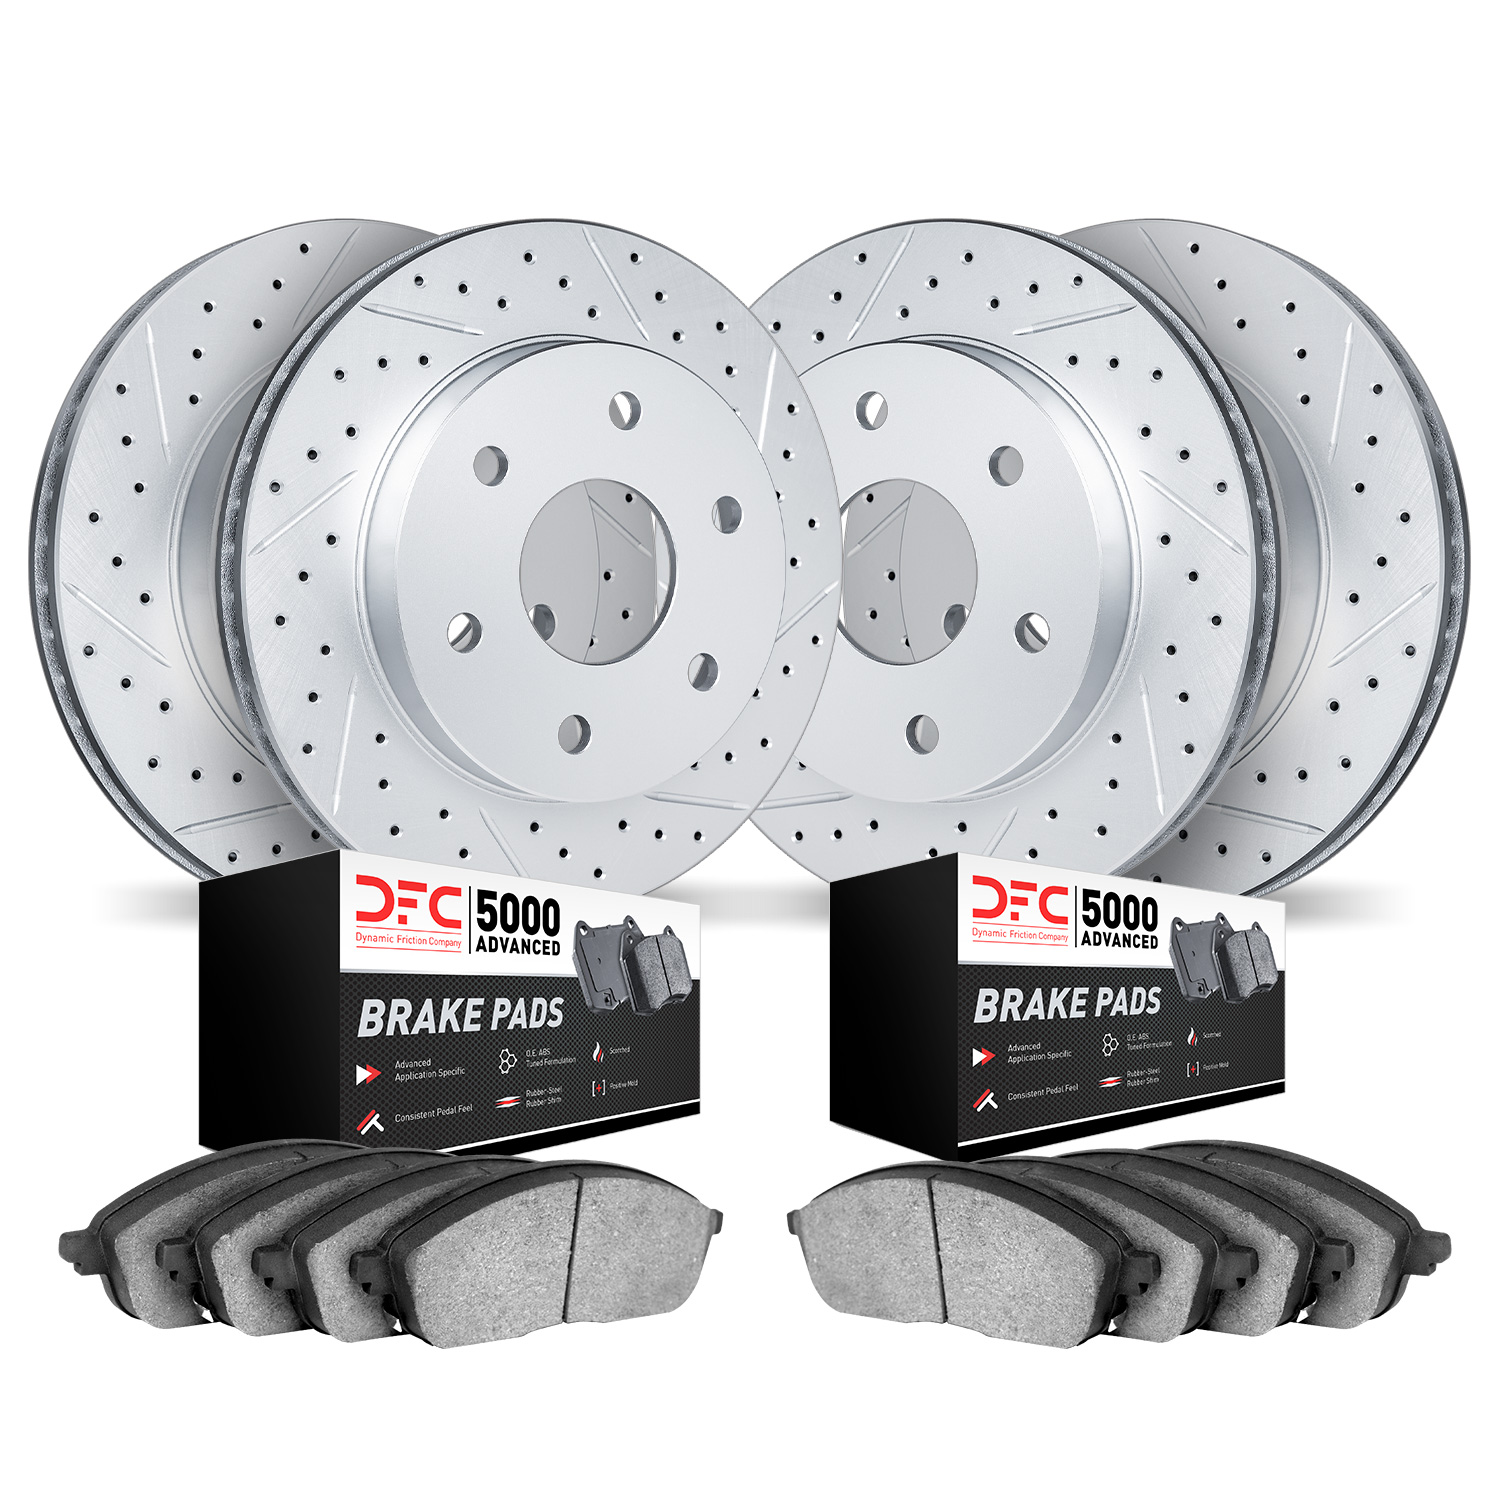 2504-40082 Geoperformance Drilled/Slotted Rotors w/5000 Advanced Brake Pads Kit, 2003-2017 Mopar, Position: Front and Rear